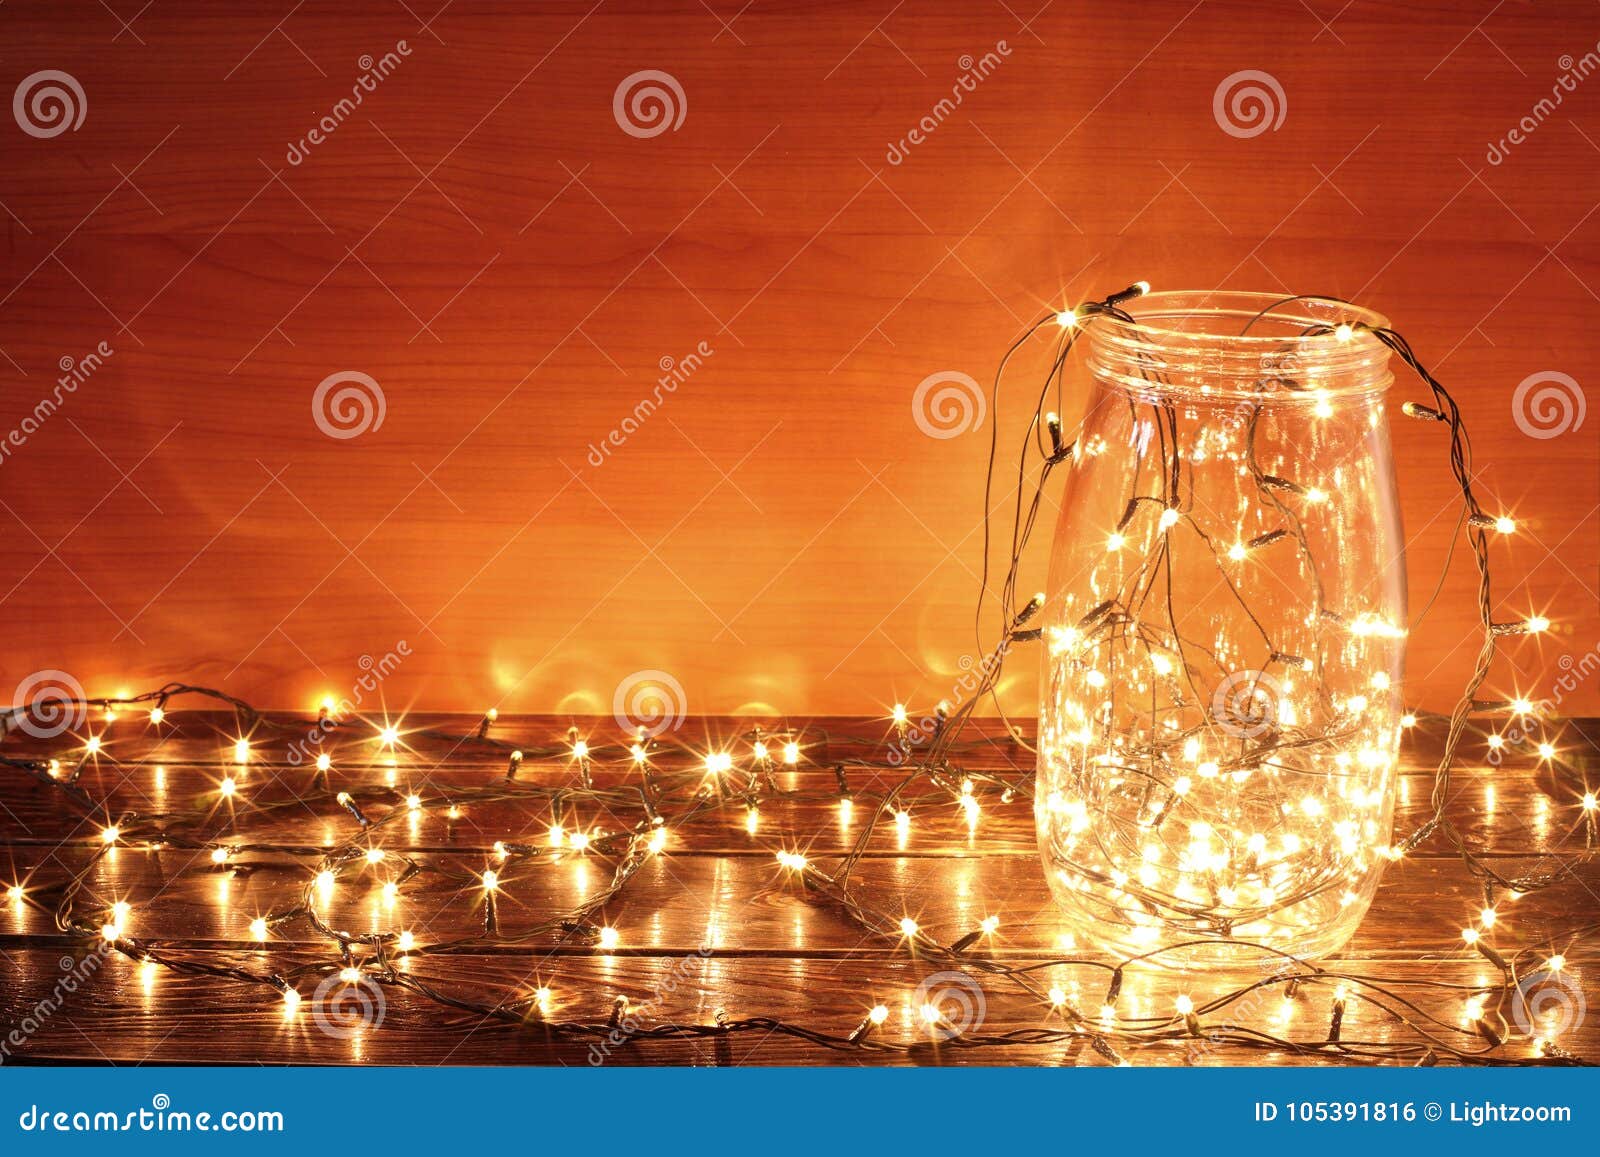 42,831 Fairy Lights Photos - Free & Royalty-Free Stock Photos from Dreamstime